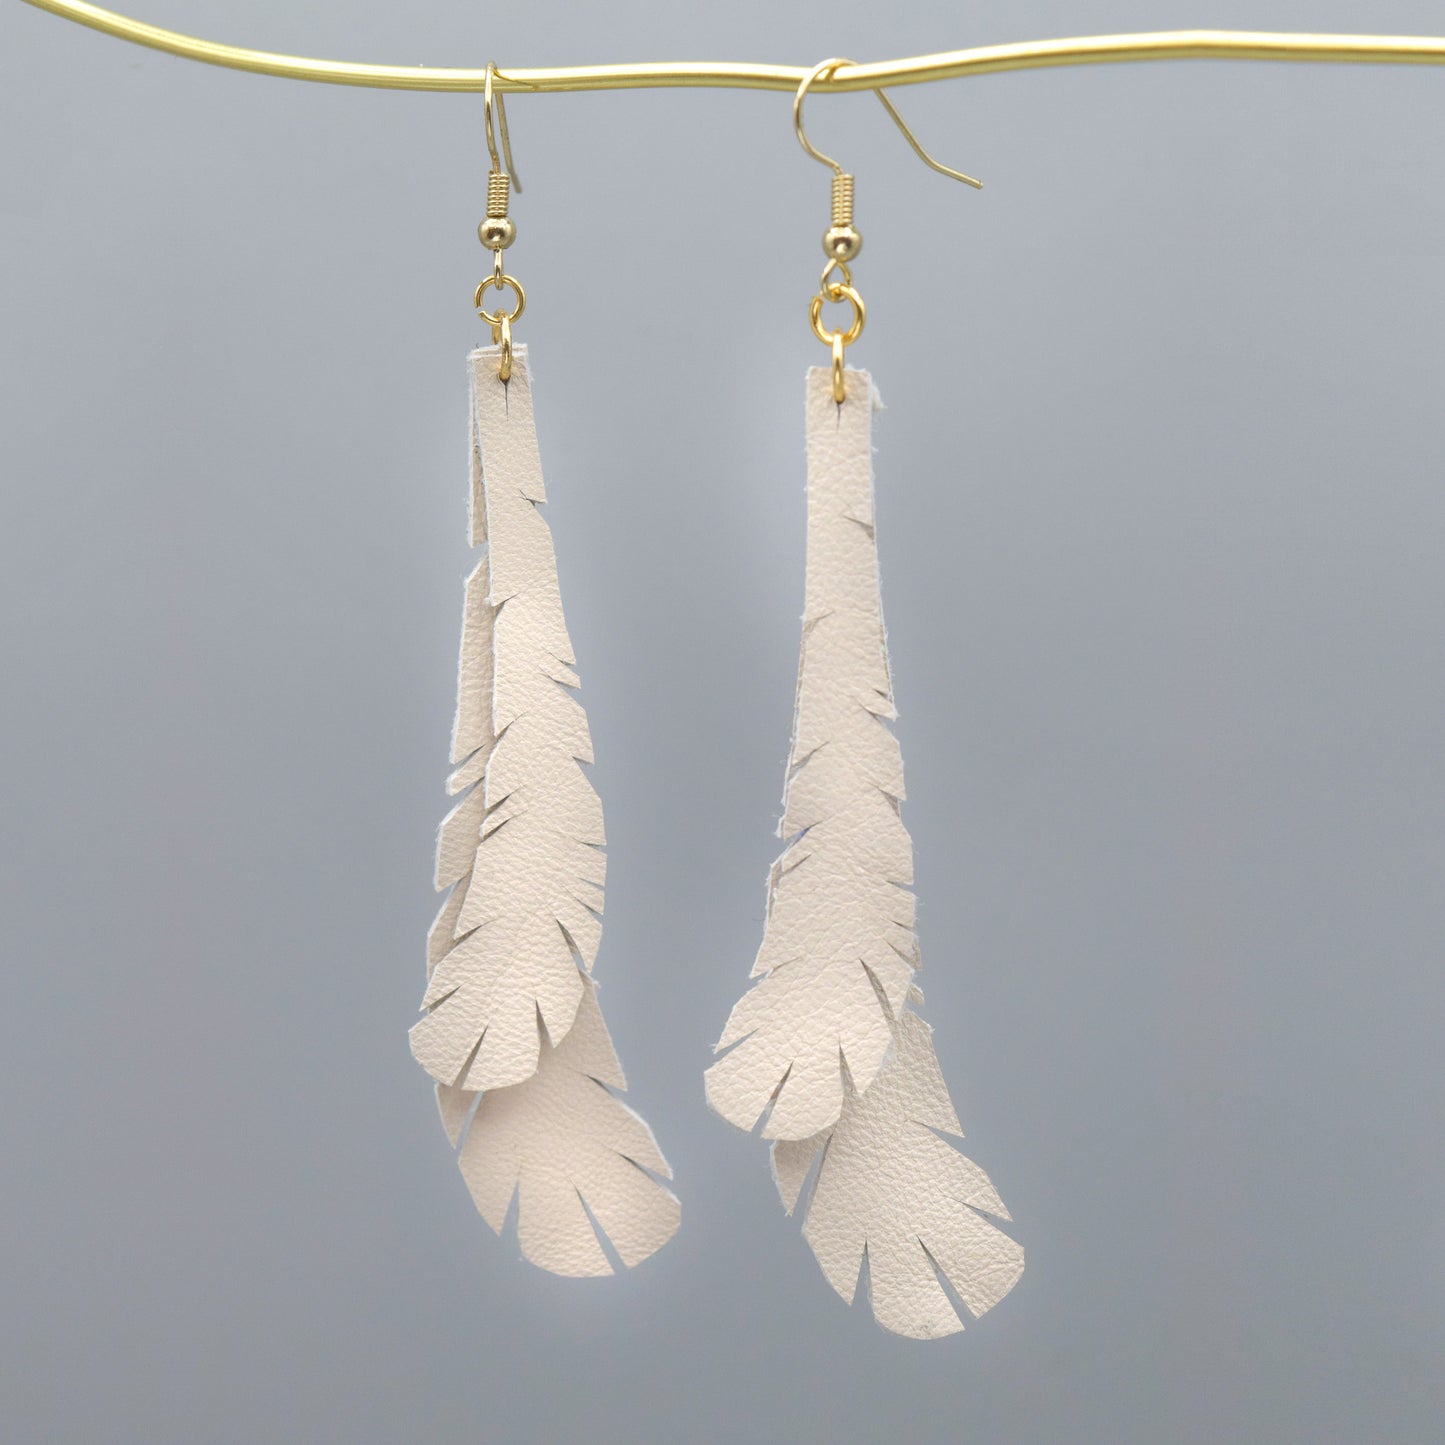 Feather Leather Earrings- Cream "Shorties"